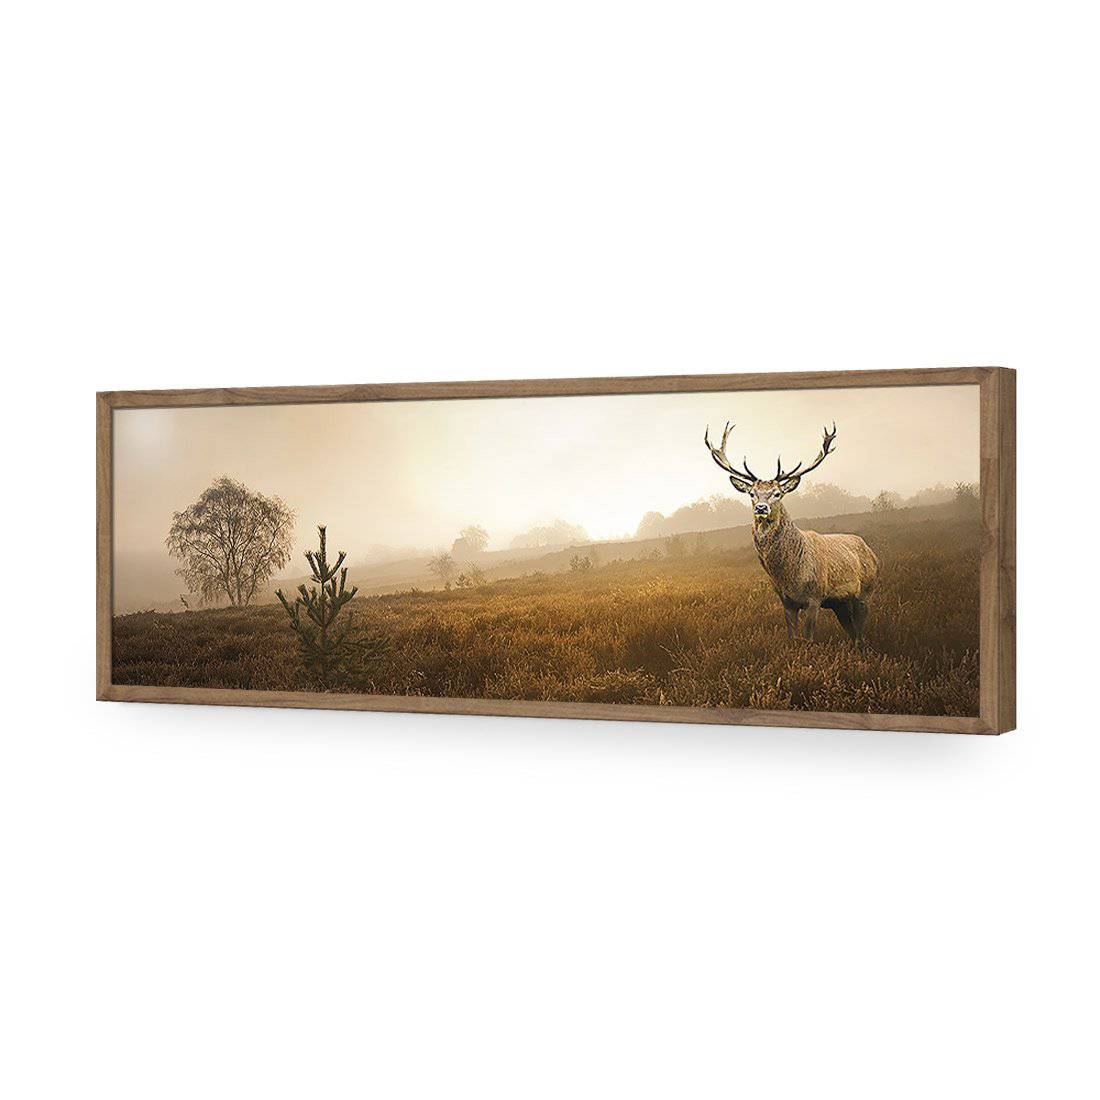 Morning Stag, Long-Acrylic-Wall Art Design-Without Border-Acrylic - Natural Frame-60x20cm-Wall Art Designs